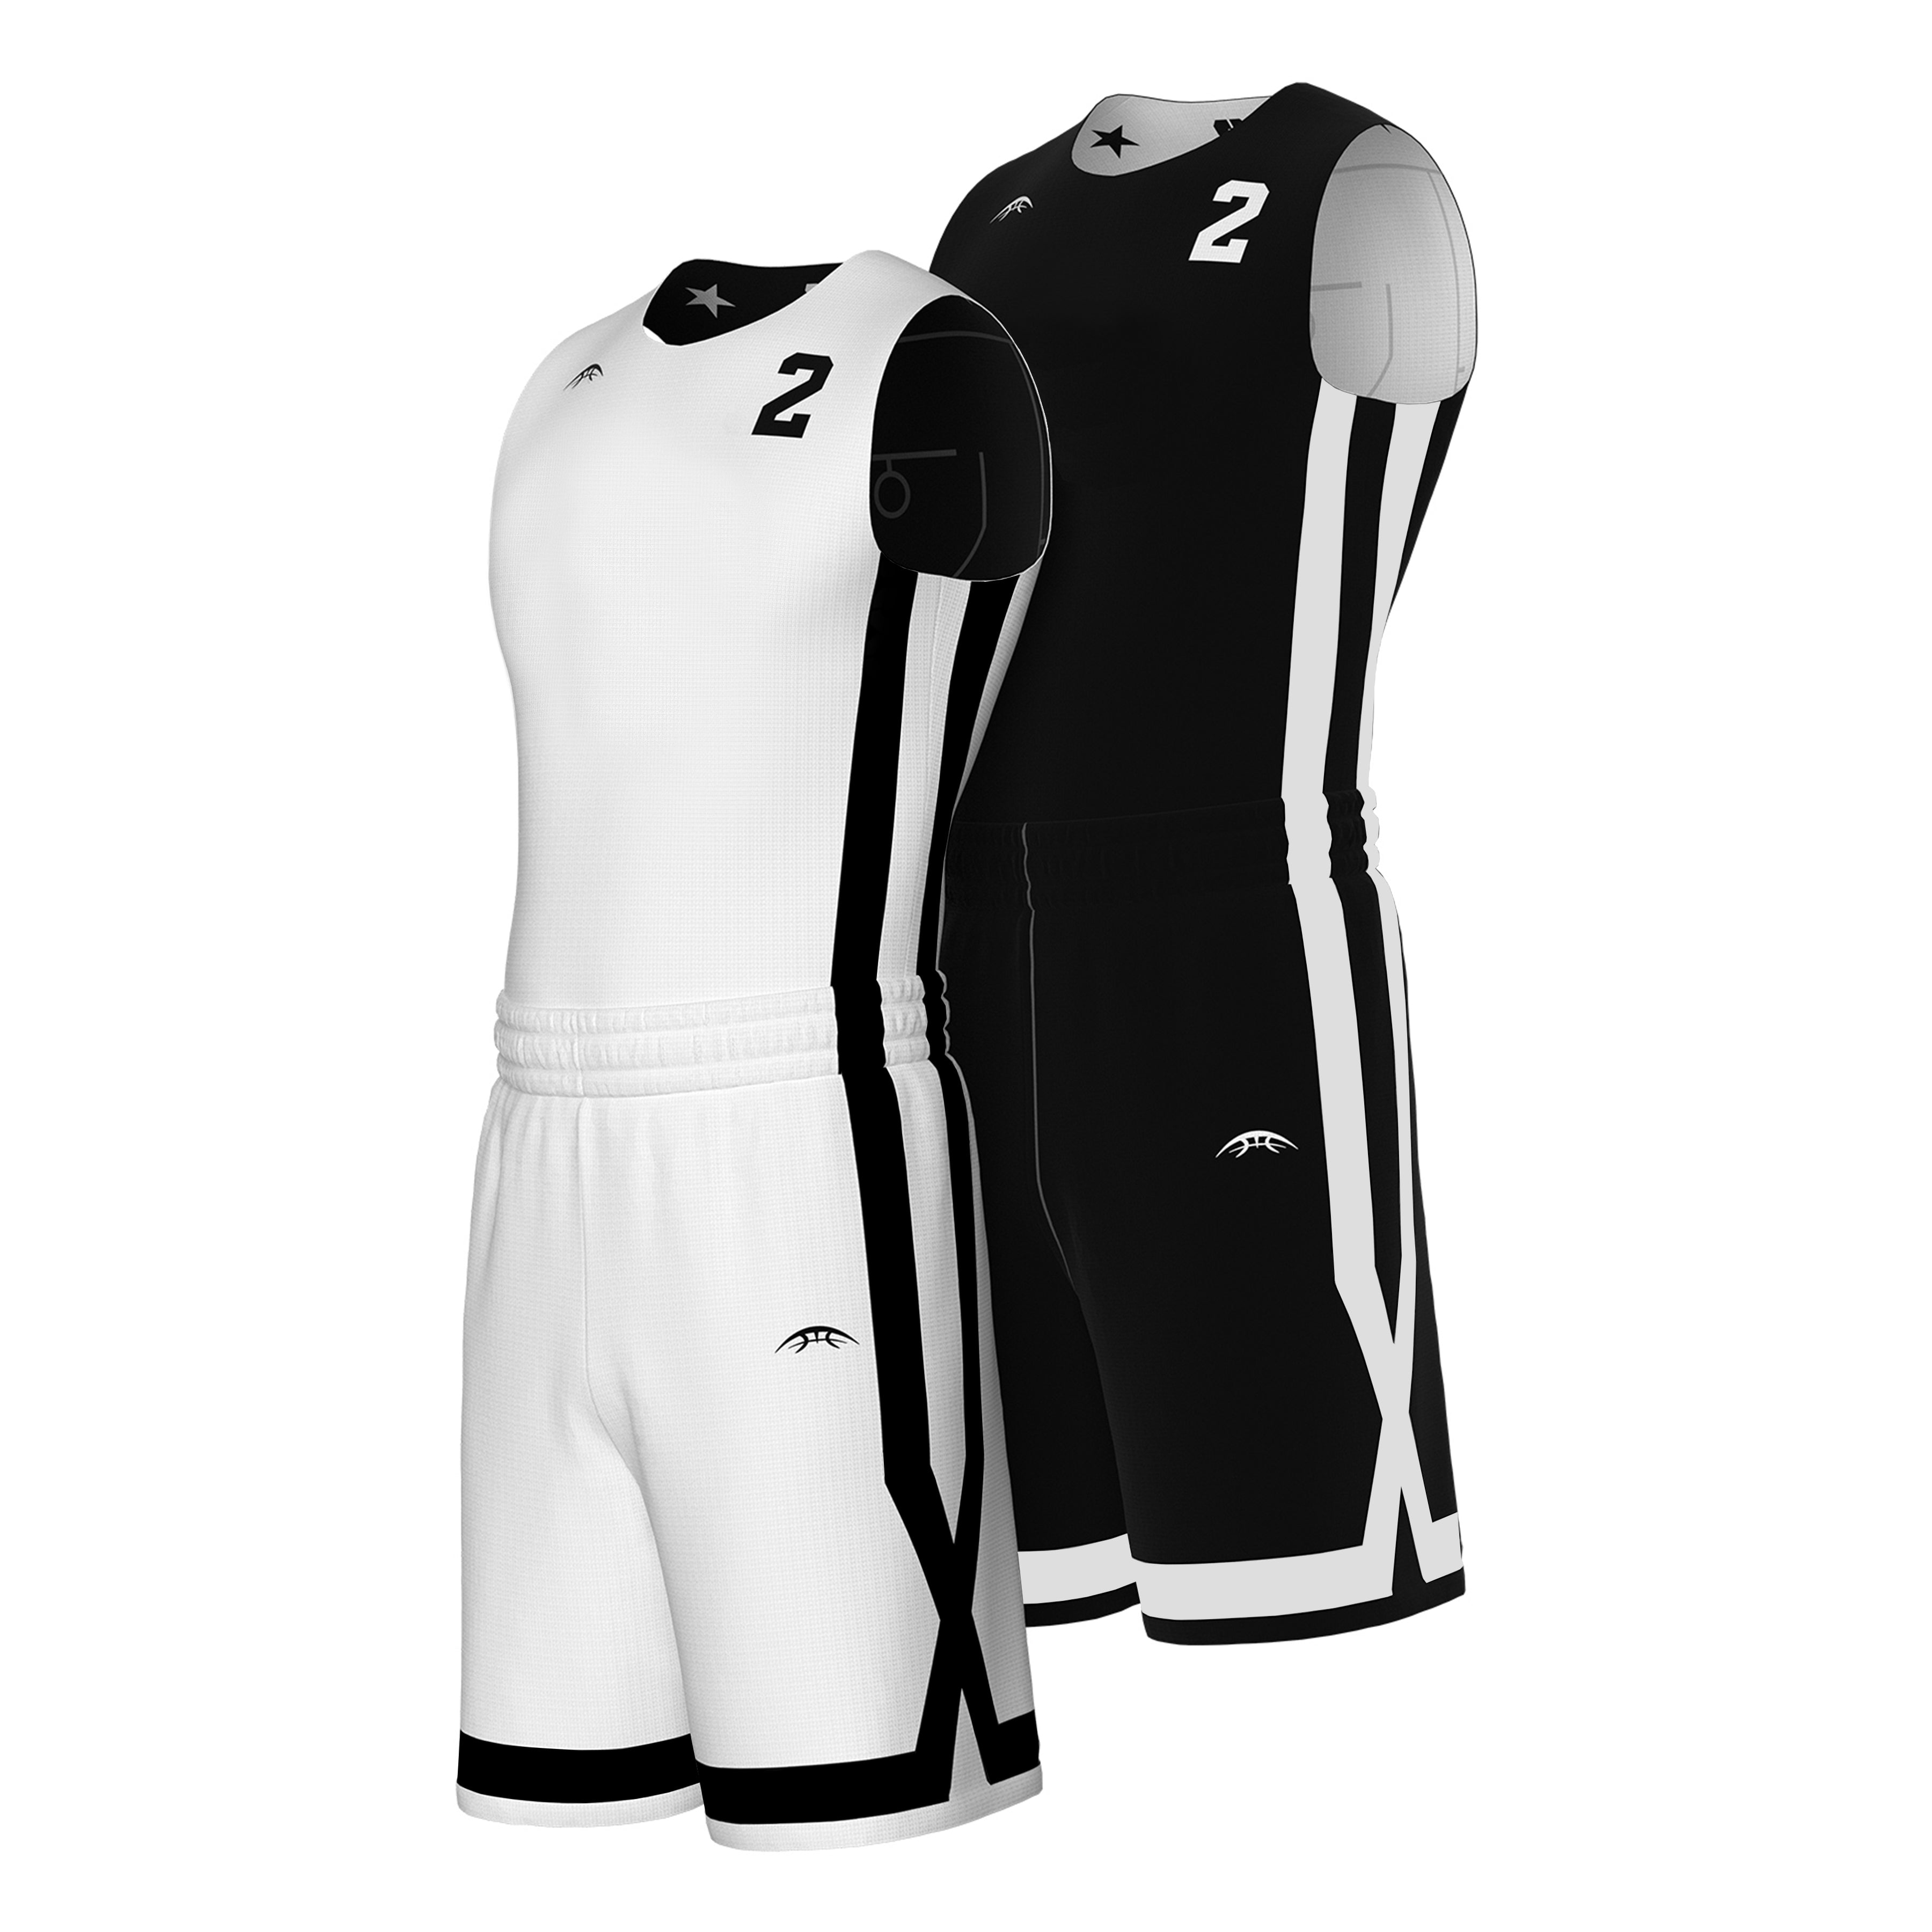 Custom Basketball Uniforms, Packages